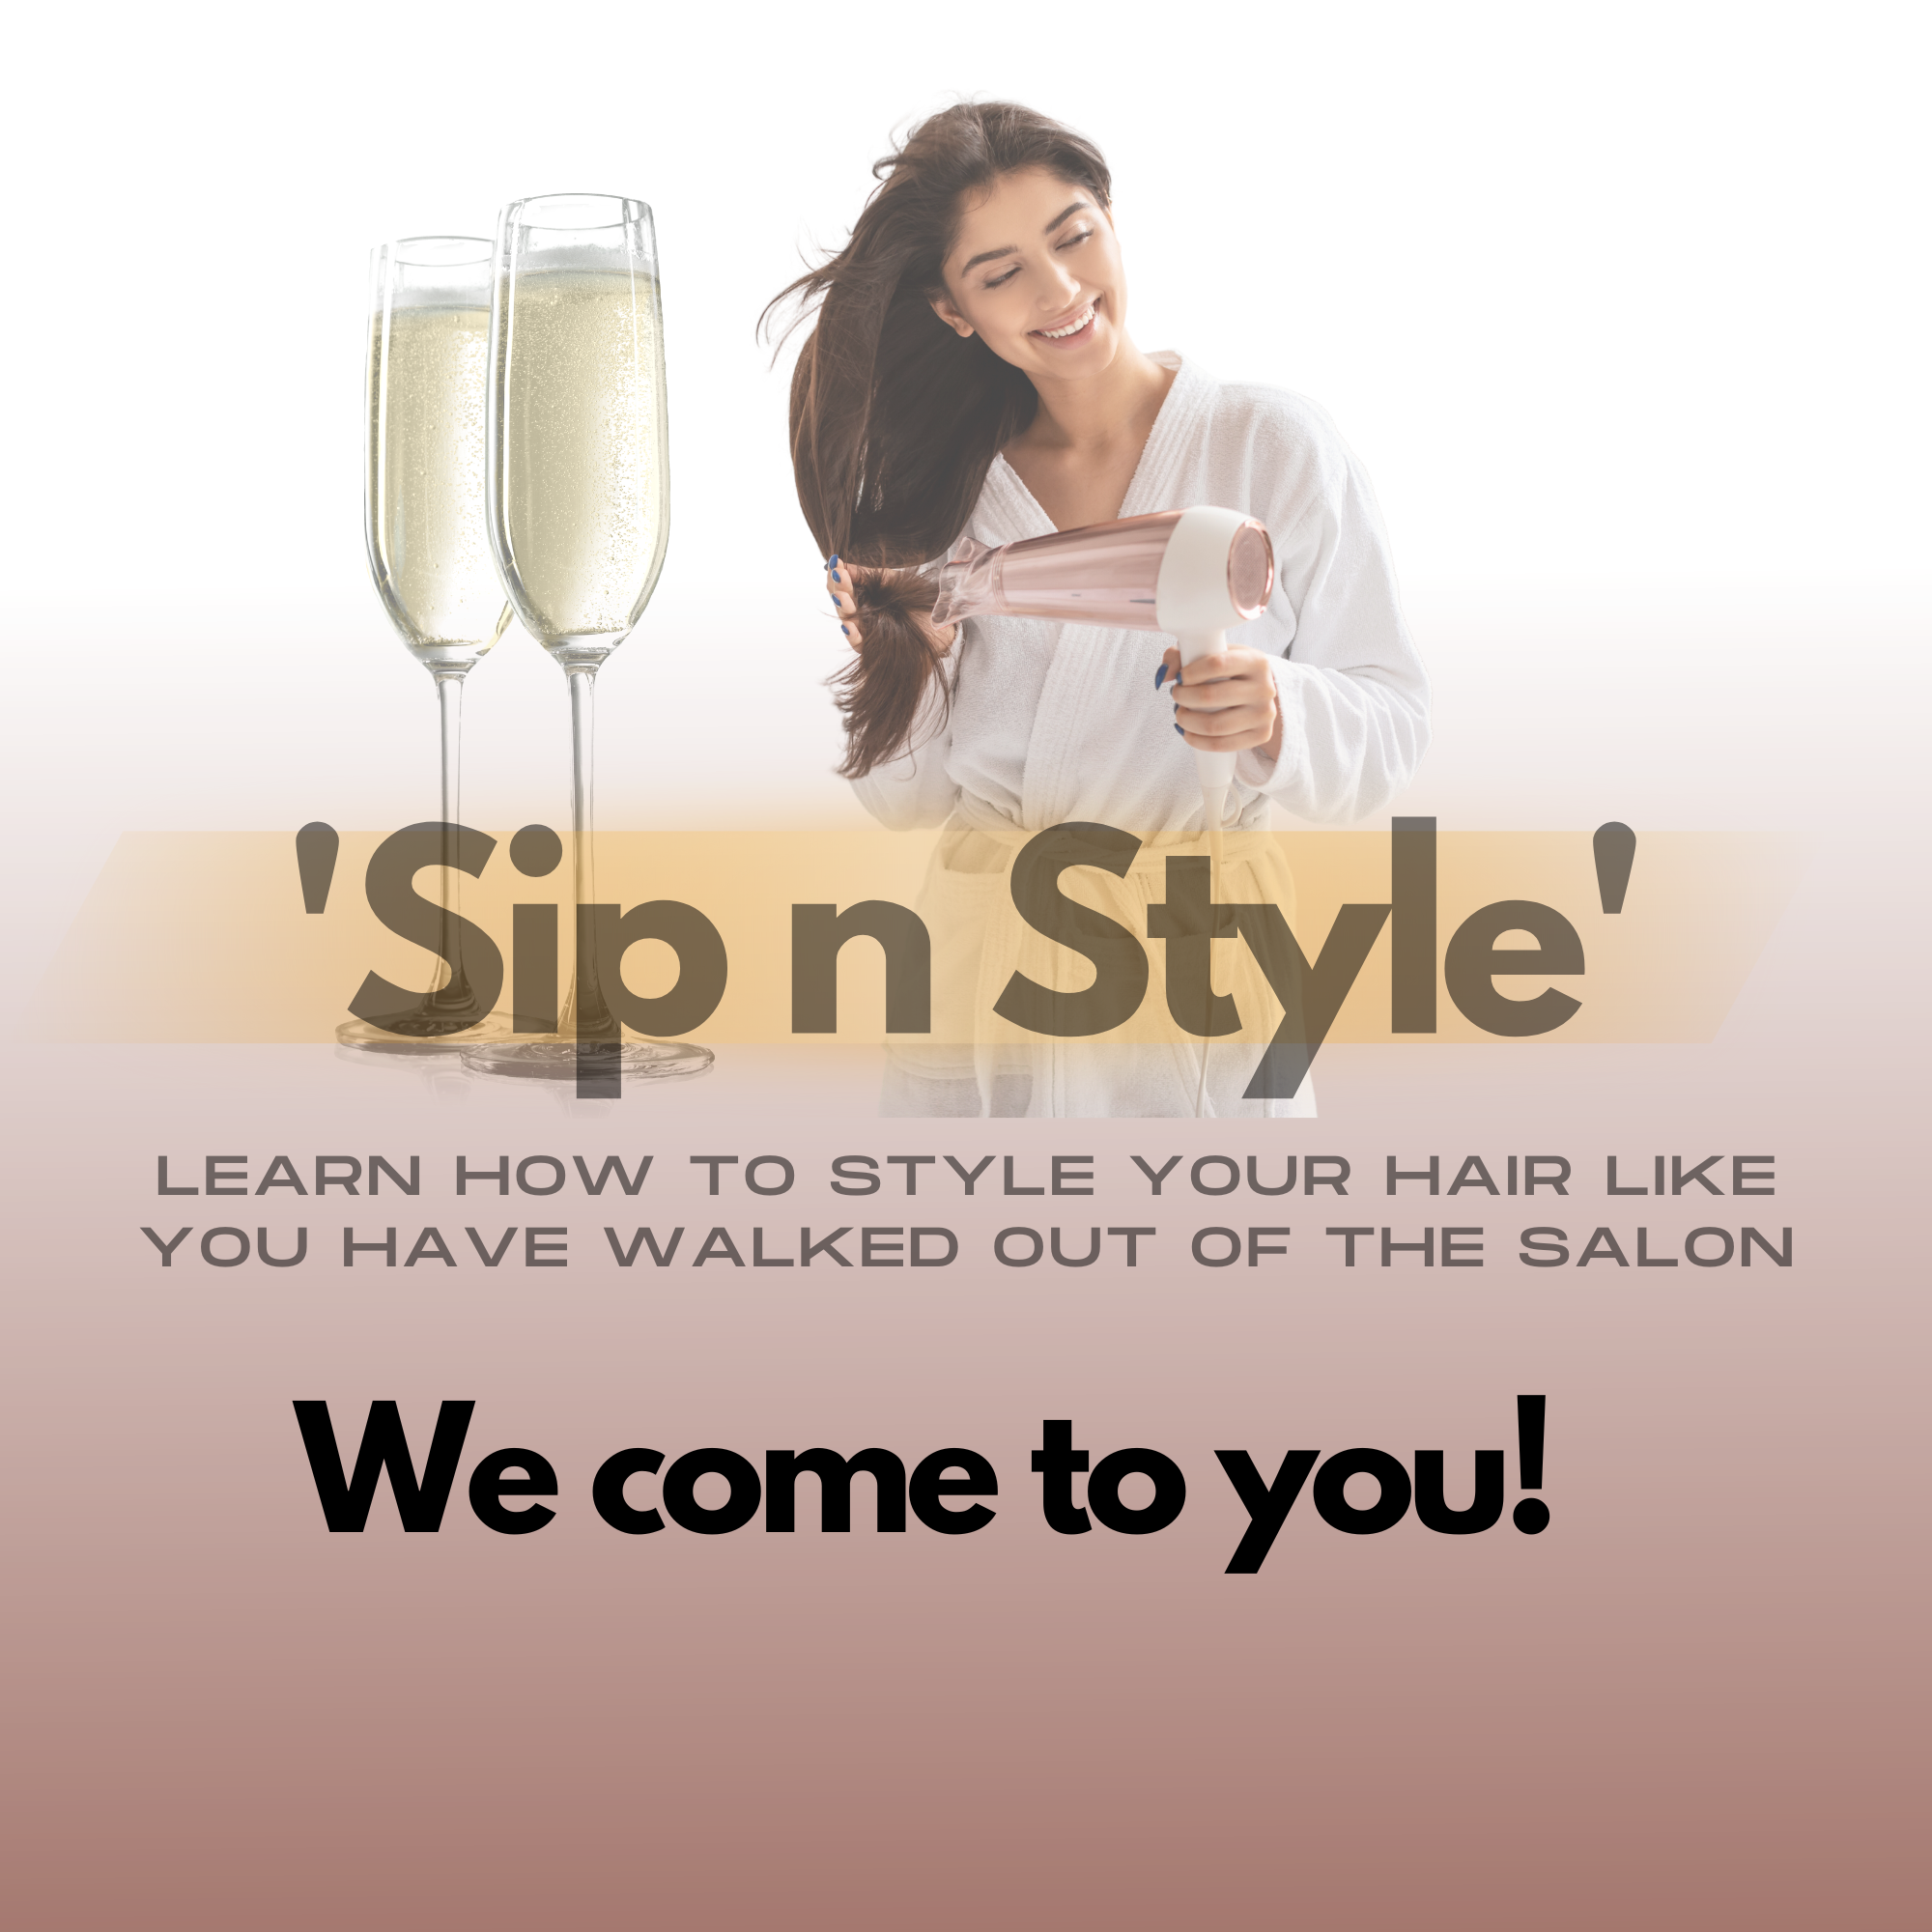 ‘Sip n Style' comes to you